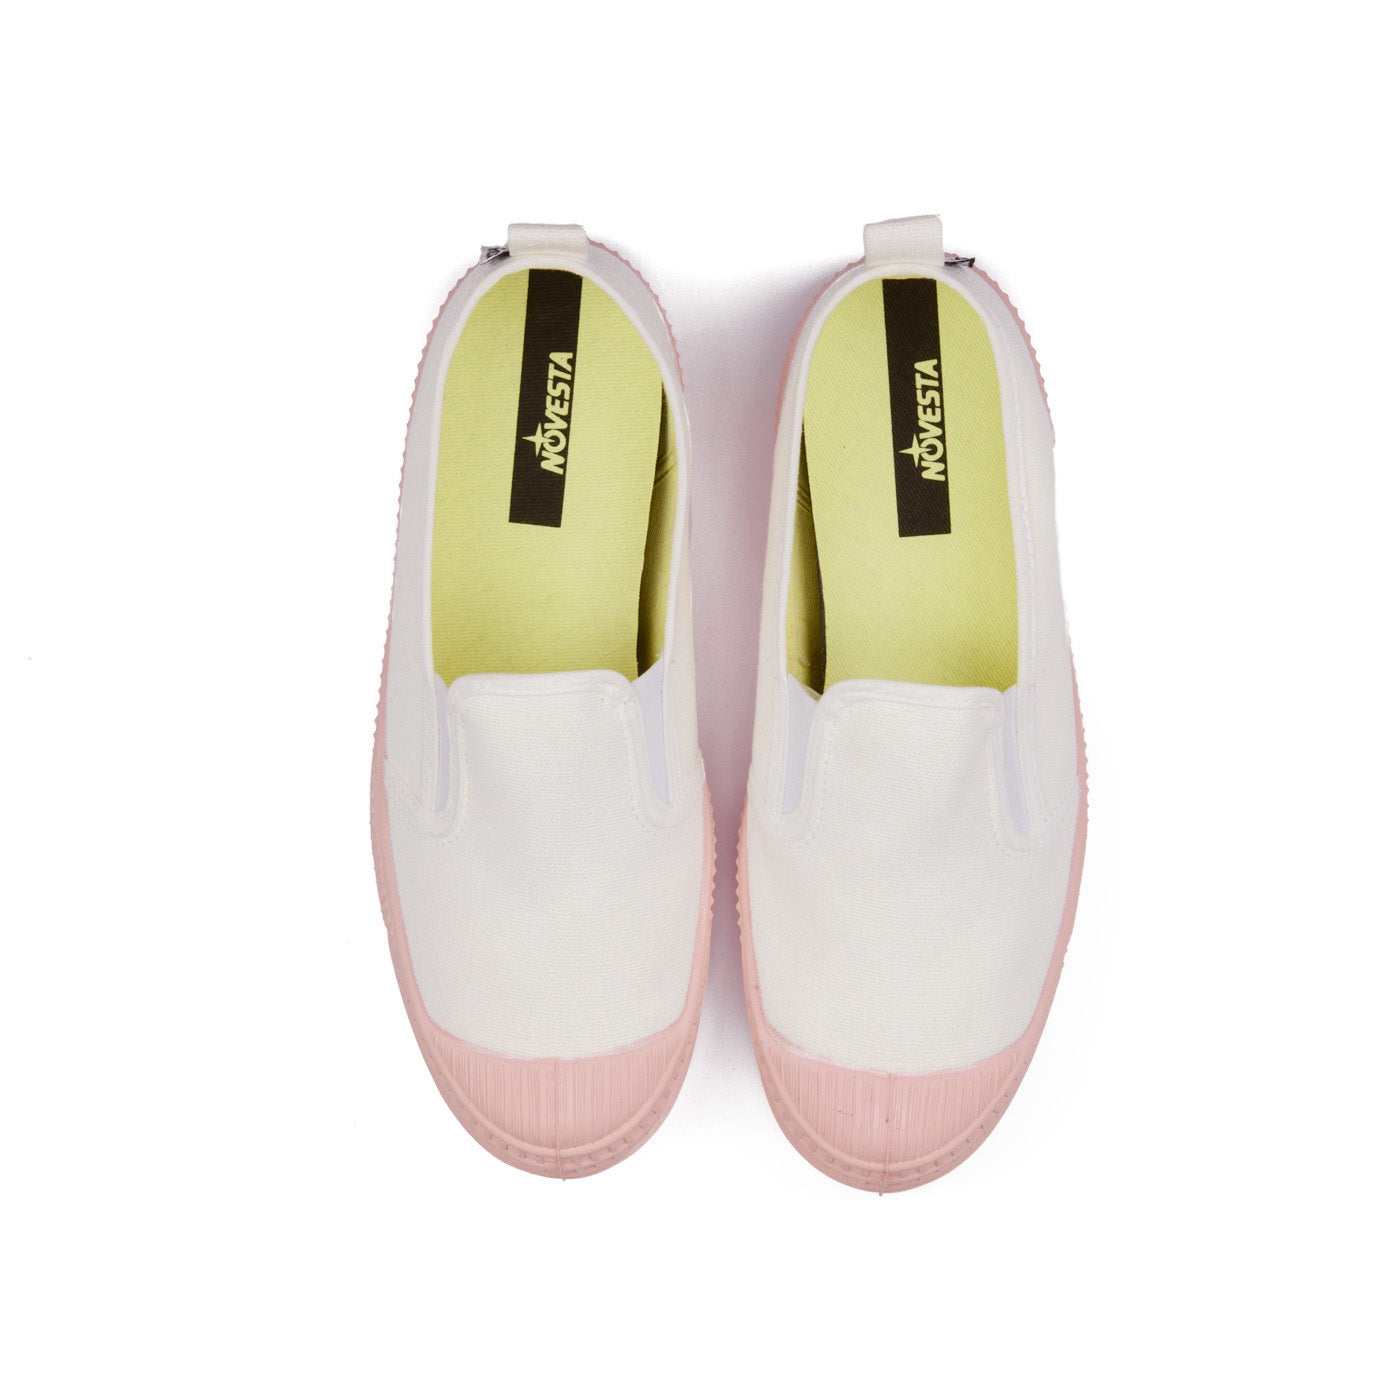 SLIP-ON COLOR SOLE 10WHITE / PINK